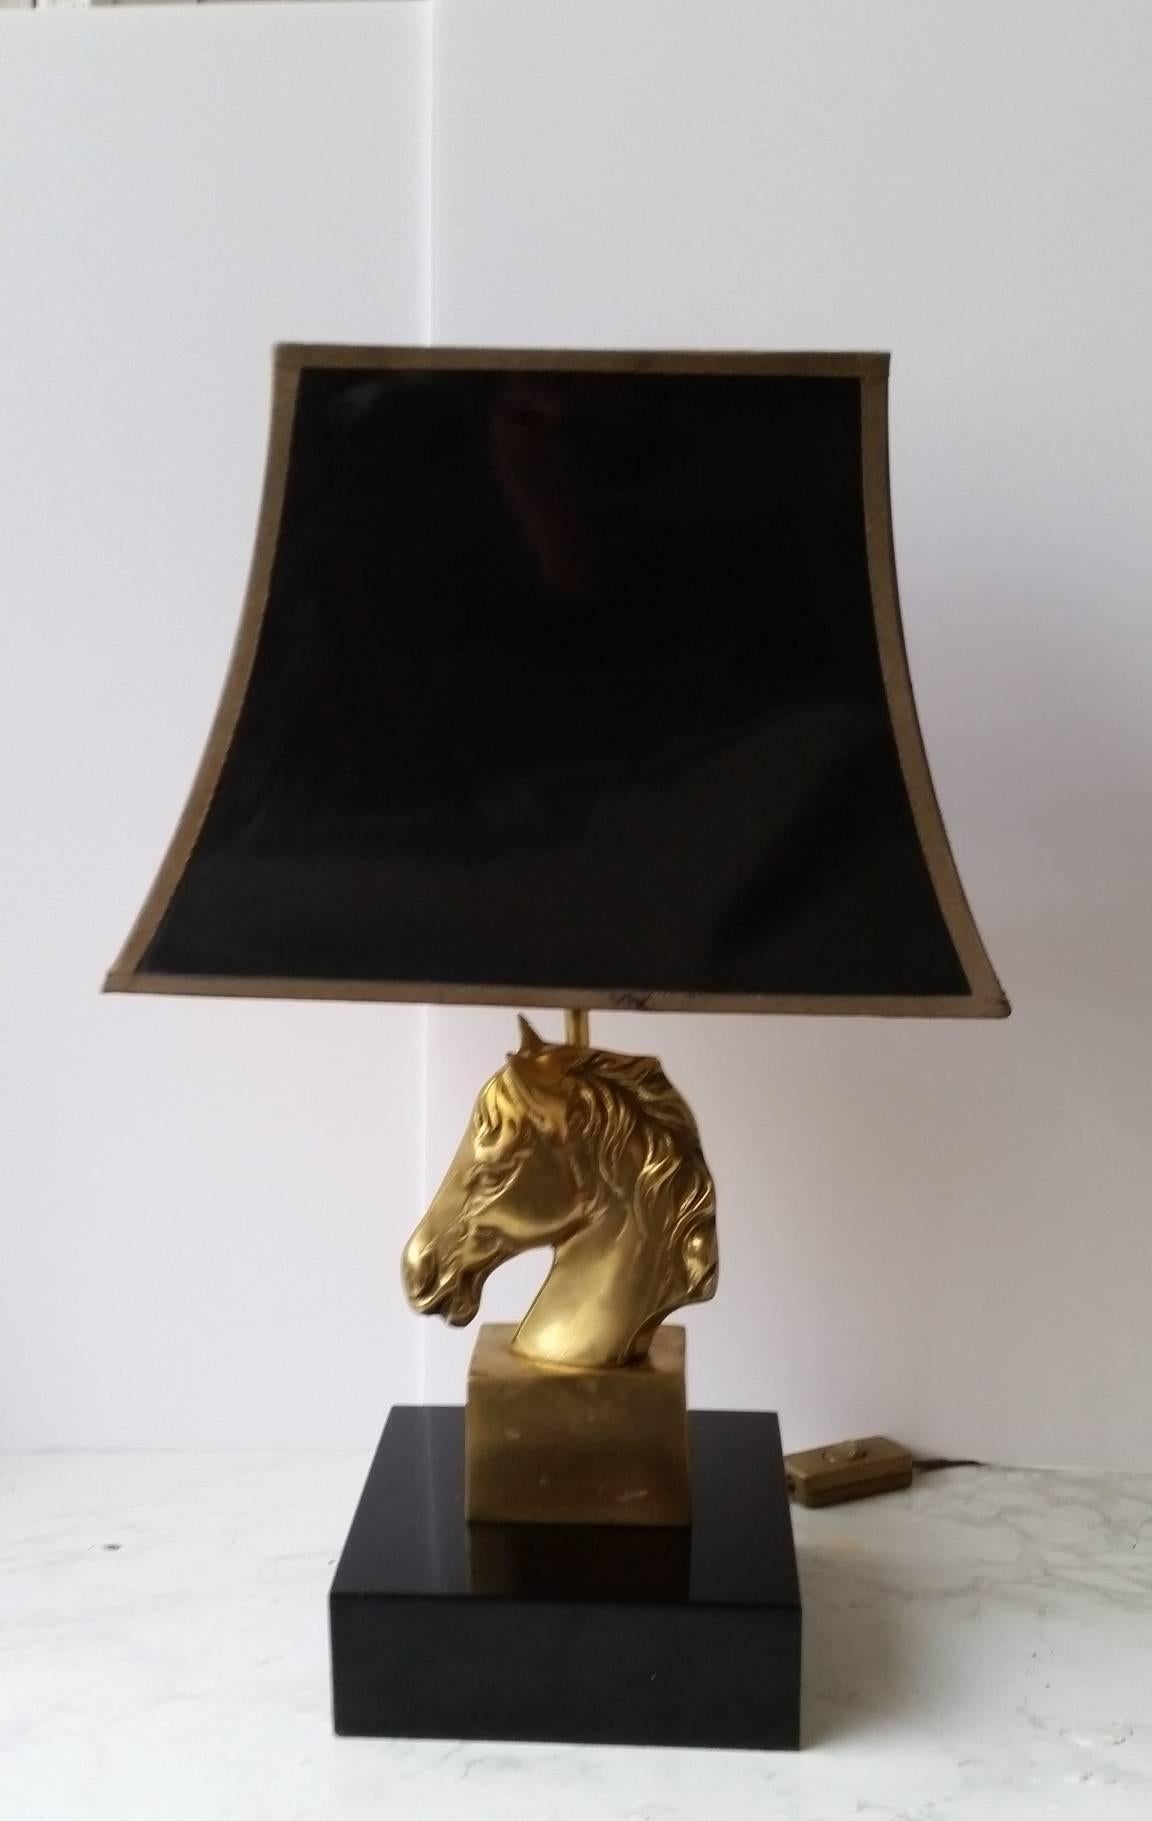 Pair of table lamps - horse head leg
edition Maison Charles, circa 1970
Vintage Art Deco - Jansen
Dimensions: H 50 x L 30 x W 21 cm
Material: Wood / brass and PVC lampshade
In good condition and in good working order!
Small imperfections usual